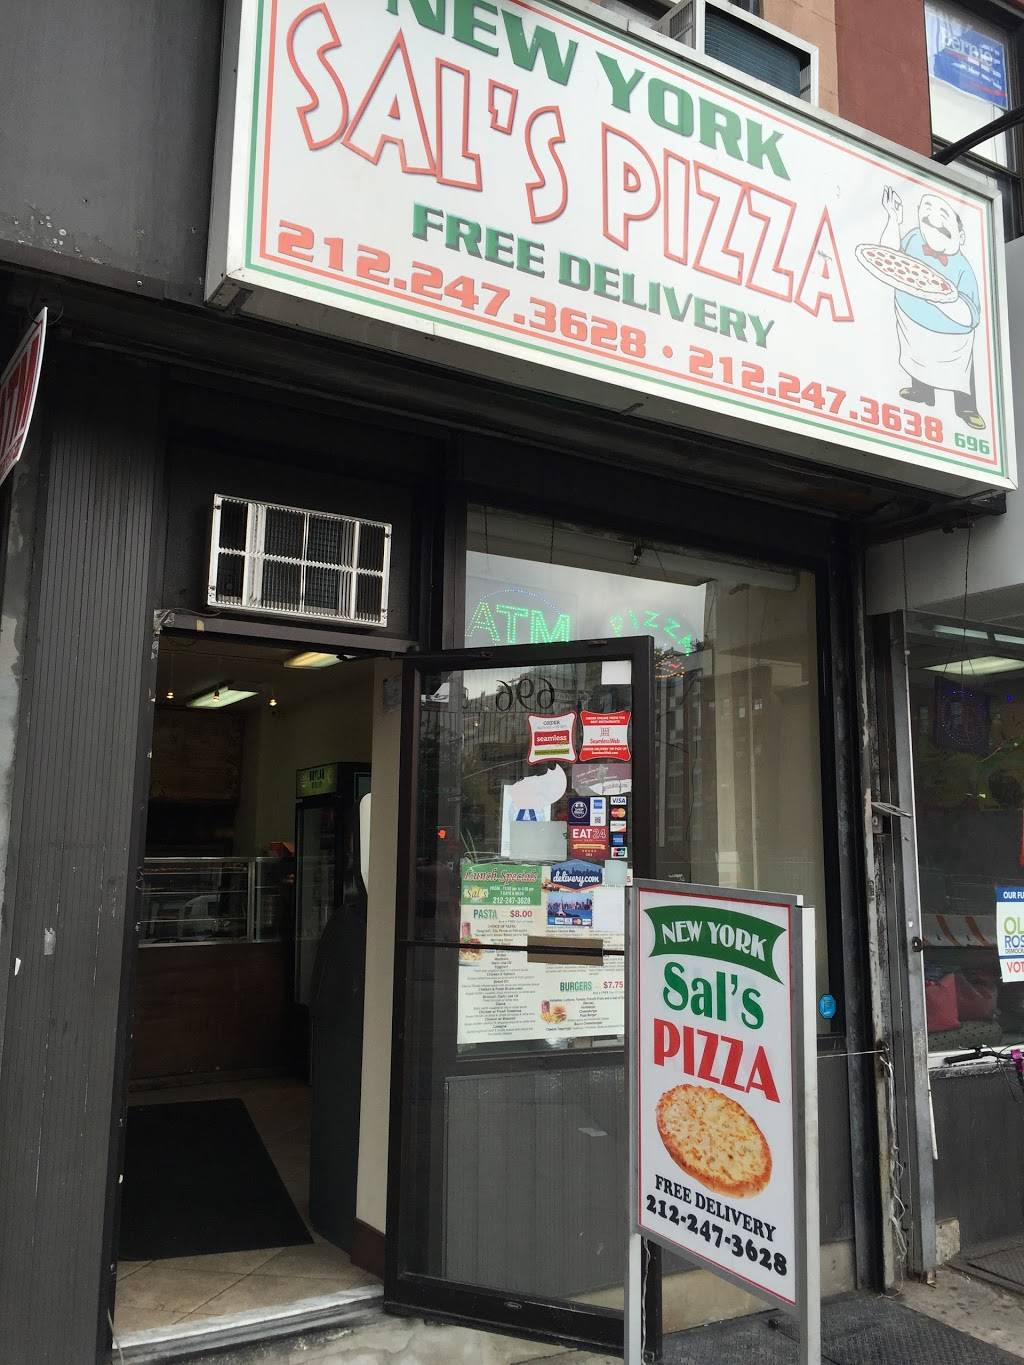 New York Sals Pizza | meal delivery | 696 10th Ave, New York, NY 10019, USA | 2122473628 OR +1 212-247-3628